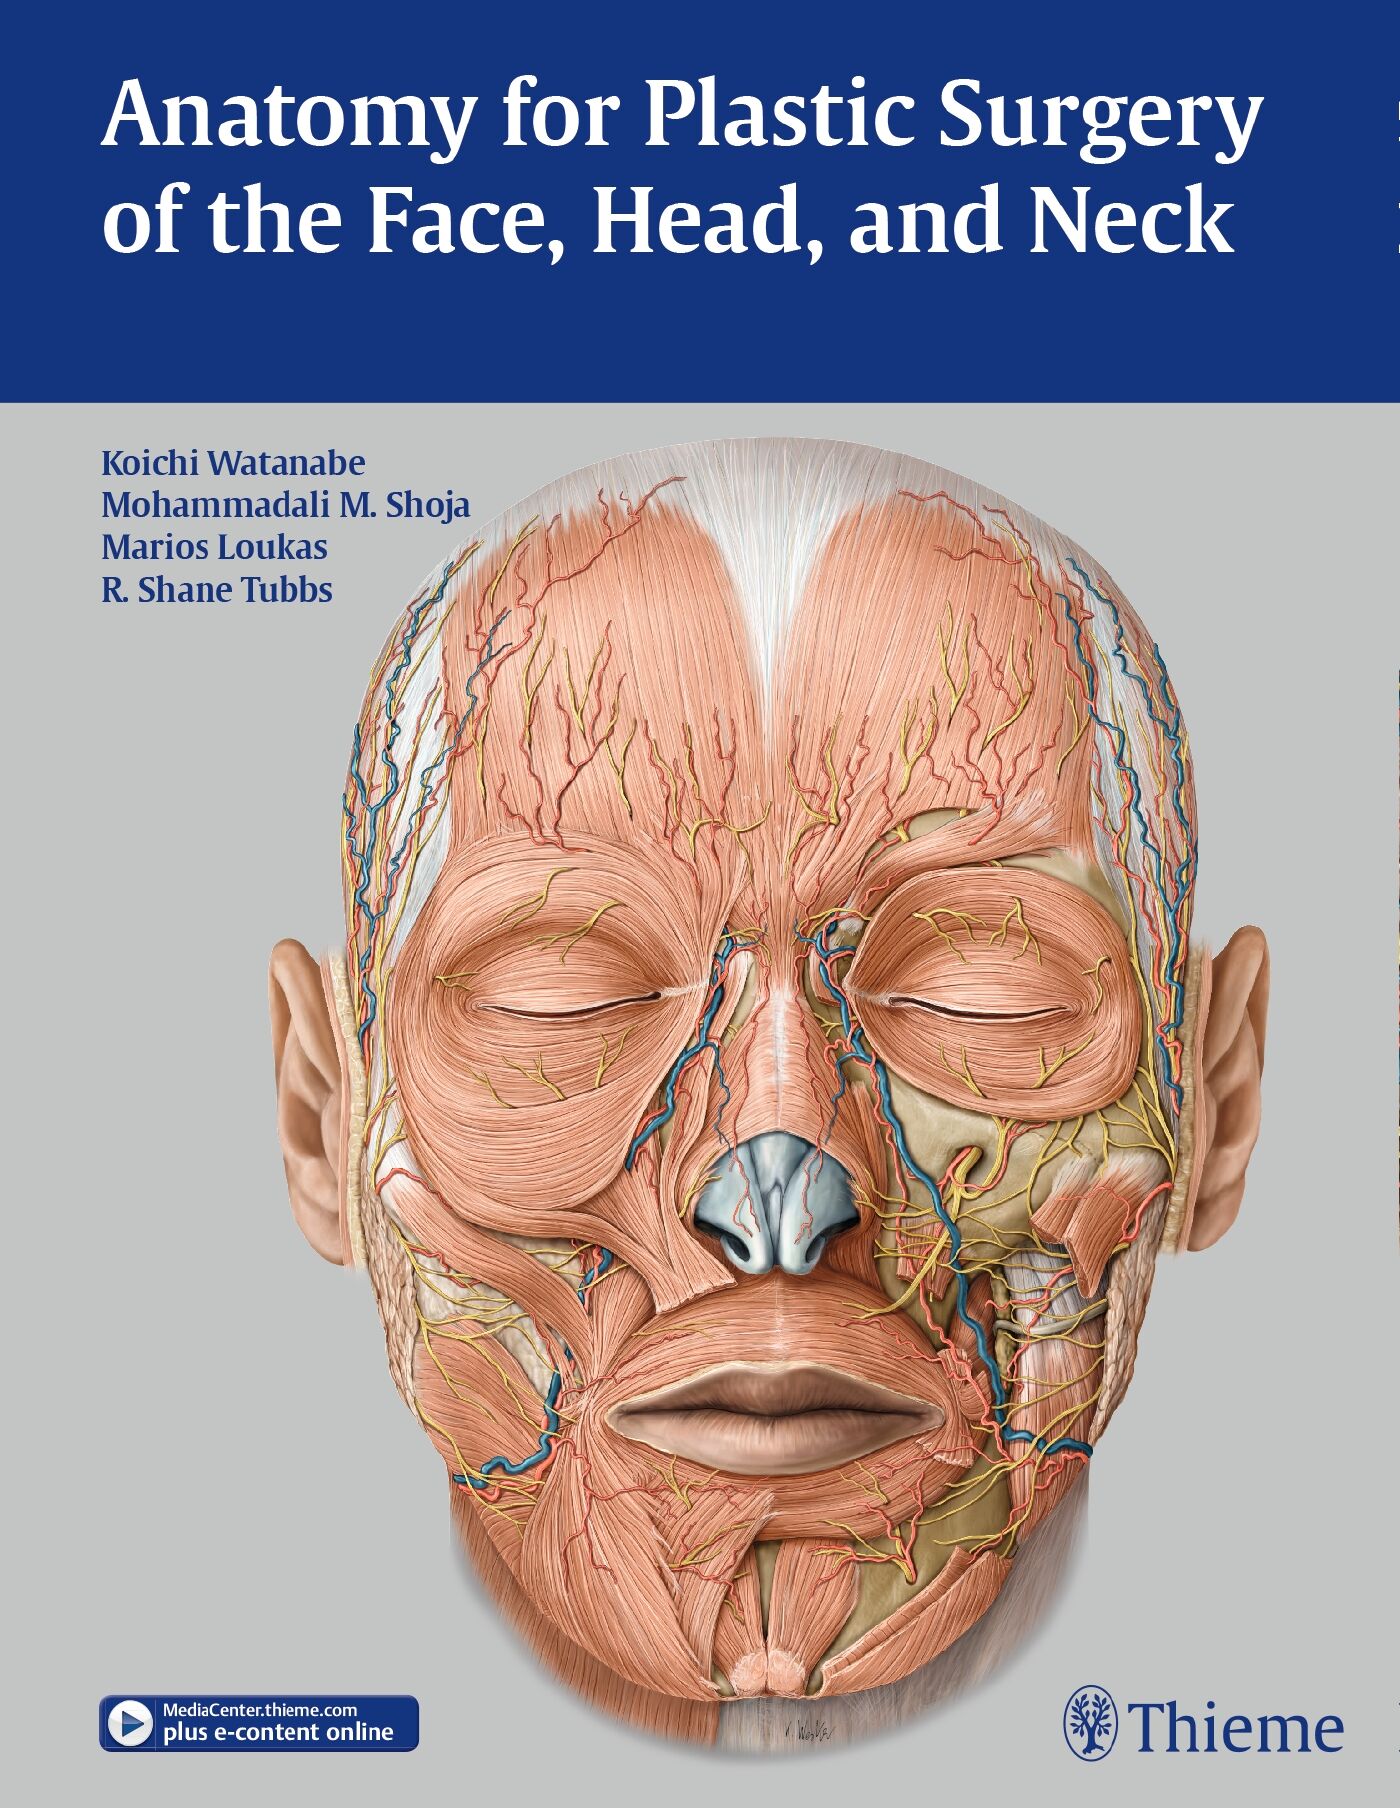 Anatomy for Plastic Surgery of the Face, Head, and Neck, 9781626230910